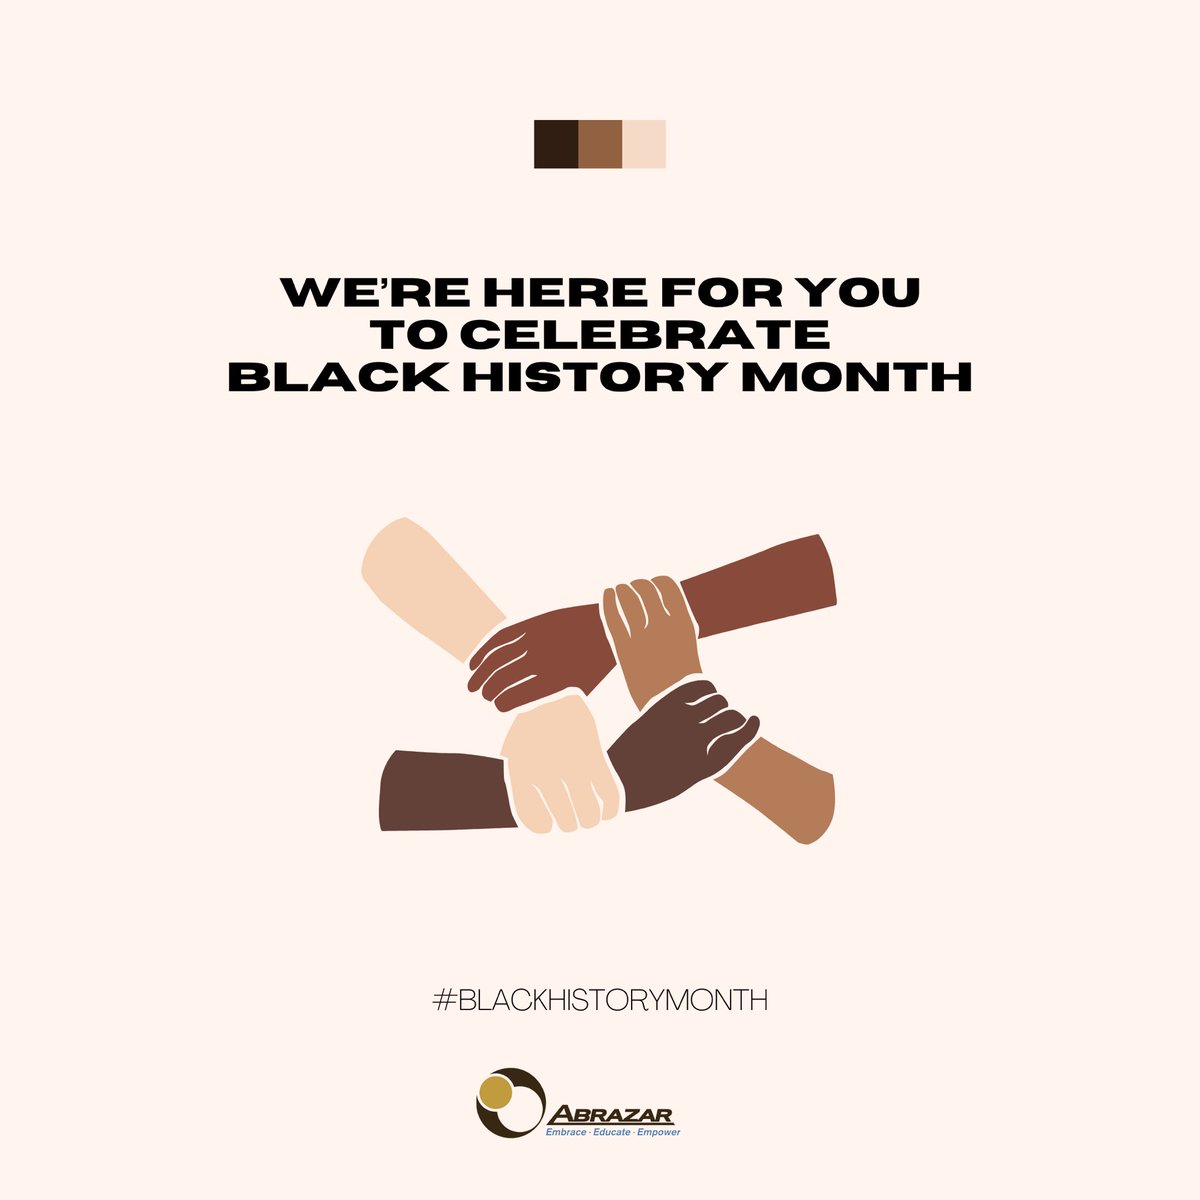 Empowering voices, celebrating resilience, and honoring the legacy.  🖤✊🏽✊🏾✊🏿This Black History Month, we stand united in fostering awareness, inclusivity, and equity.
 
#BlackHistoryMonth #EmpowerChange #BlackArtists #ChangeAgents #ArtofResistance #InclusiveFuture #equity